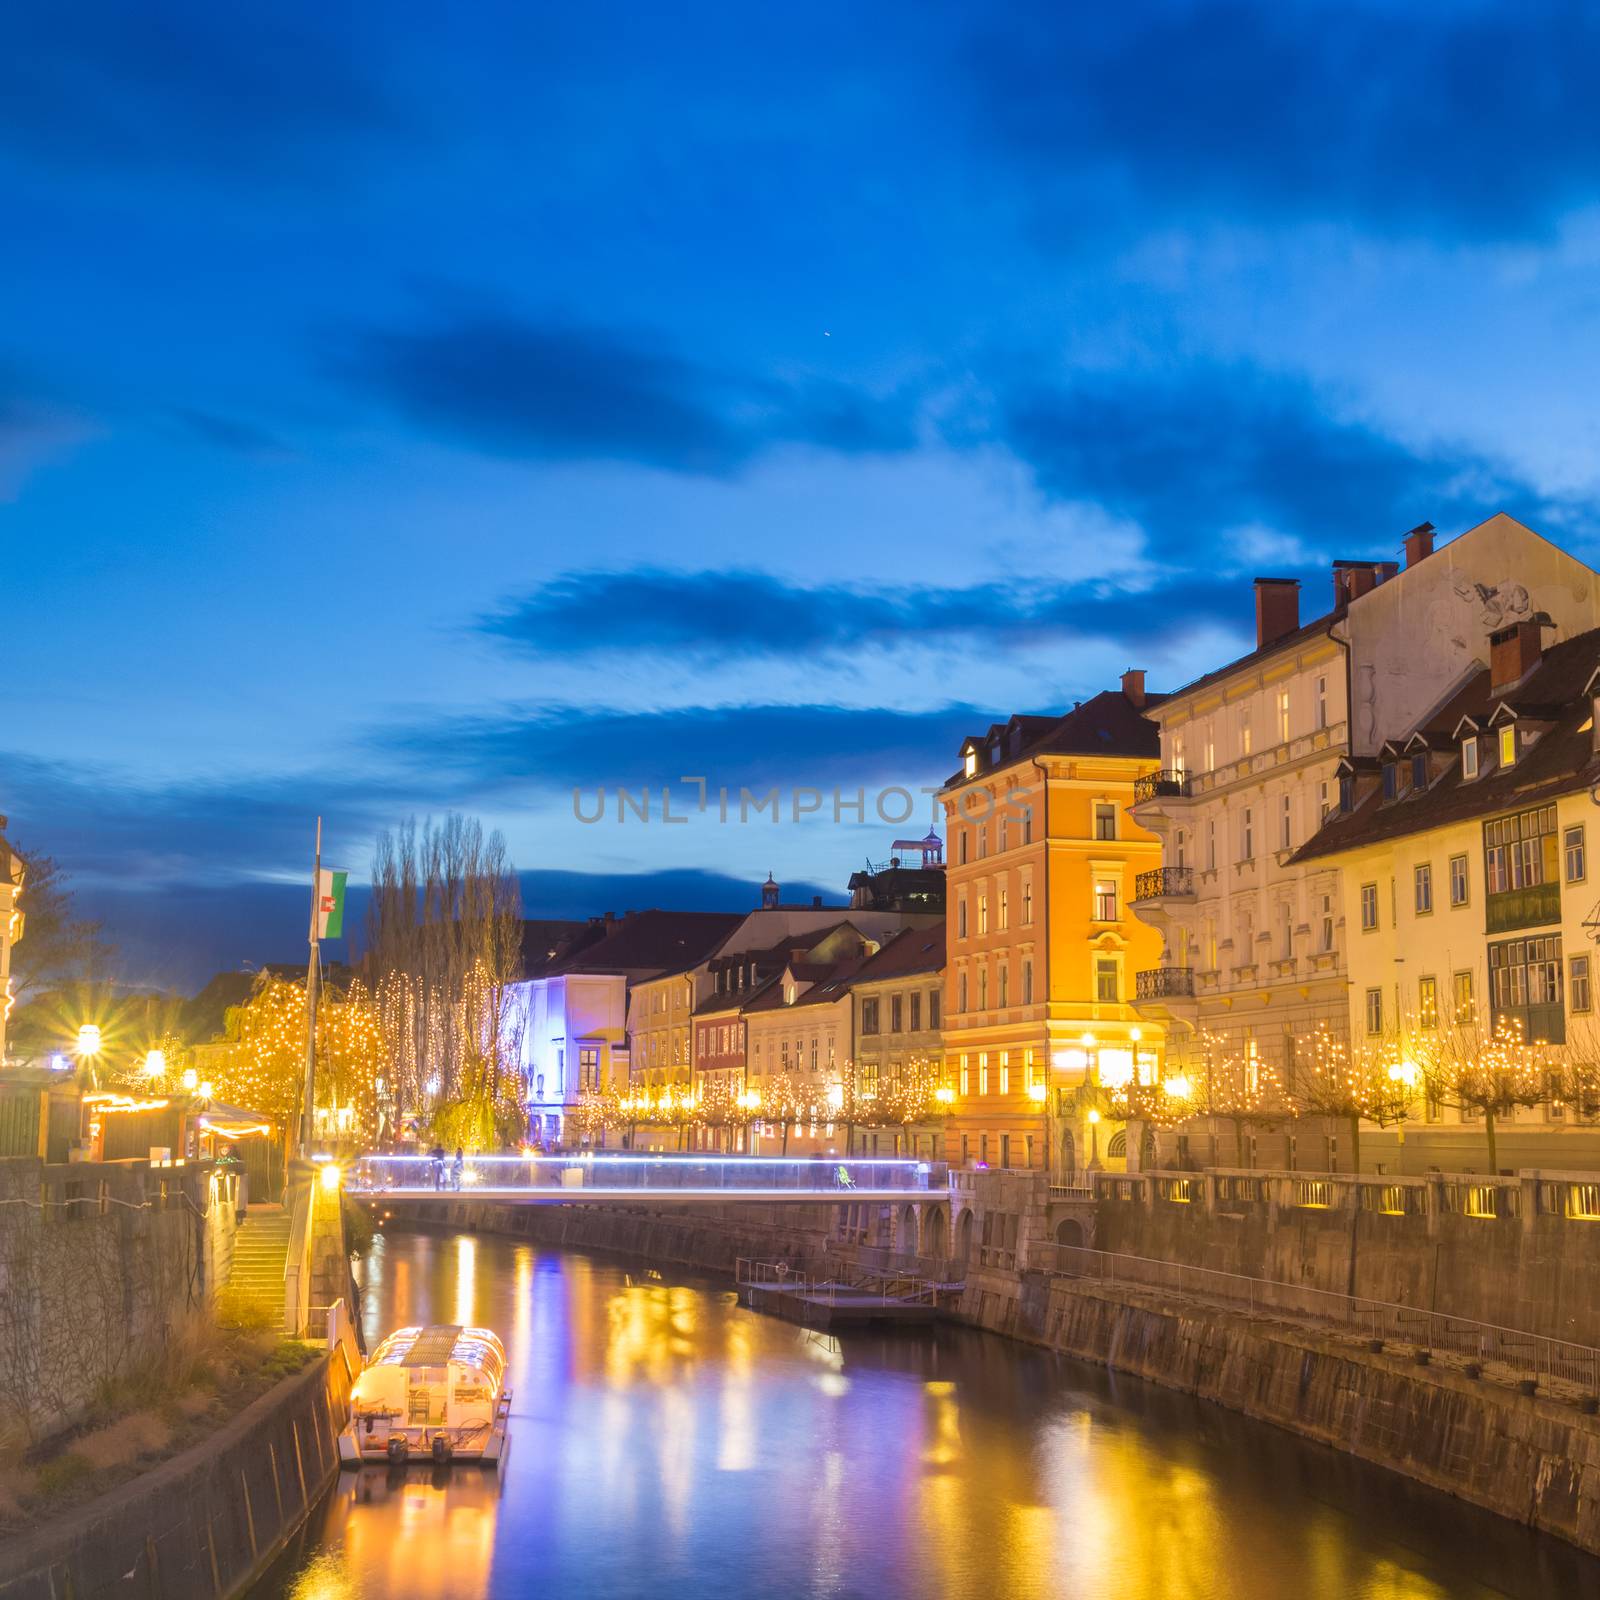 View of lively river Ljubljanica bank with new bridge in old city center decorated with Christmas lights. Ljubljana, Slovenia, Europe. Shot at dusk.